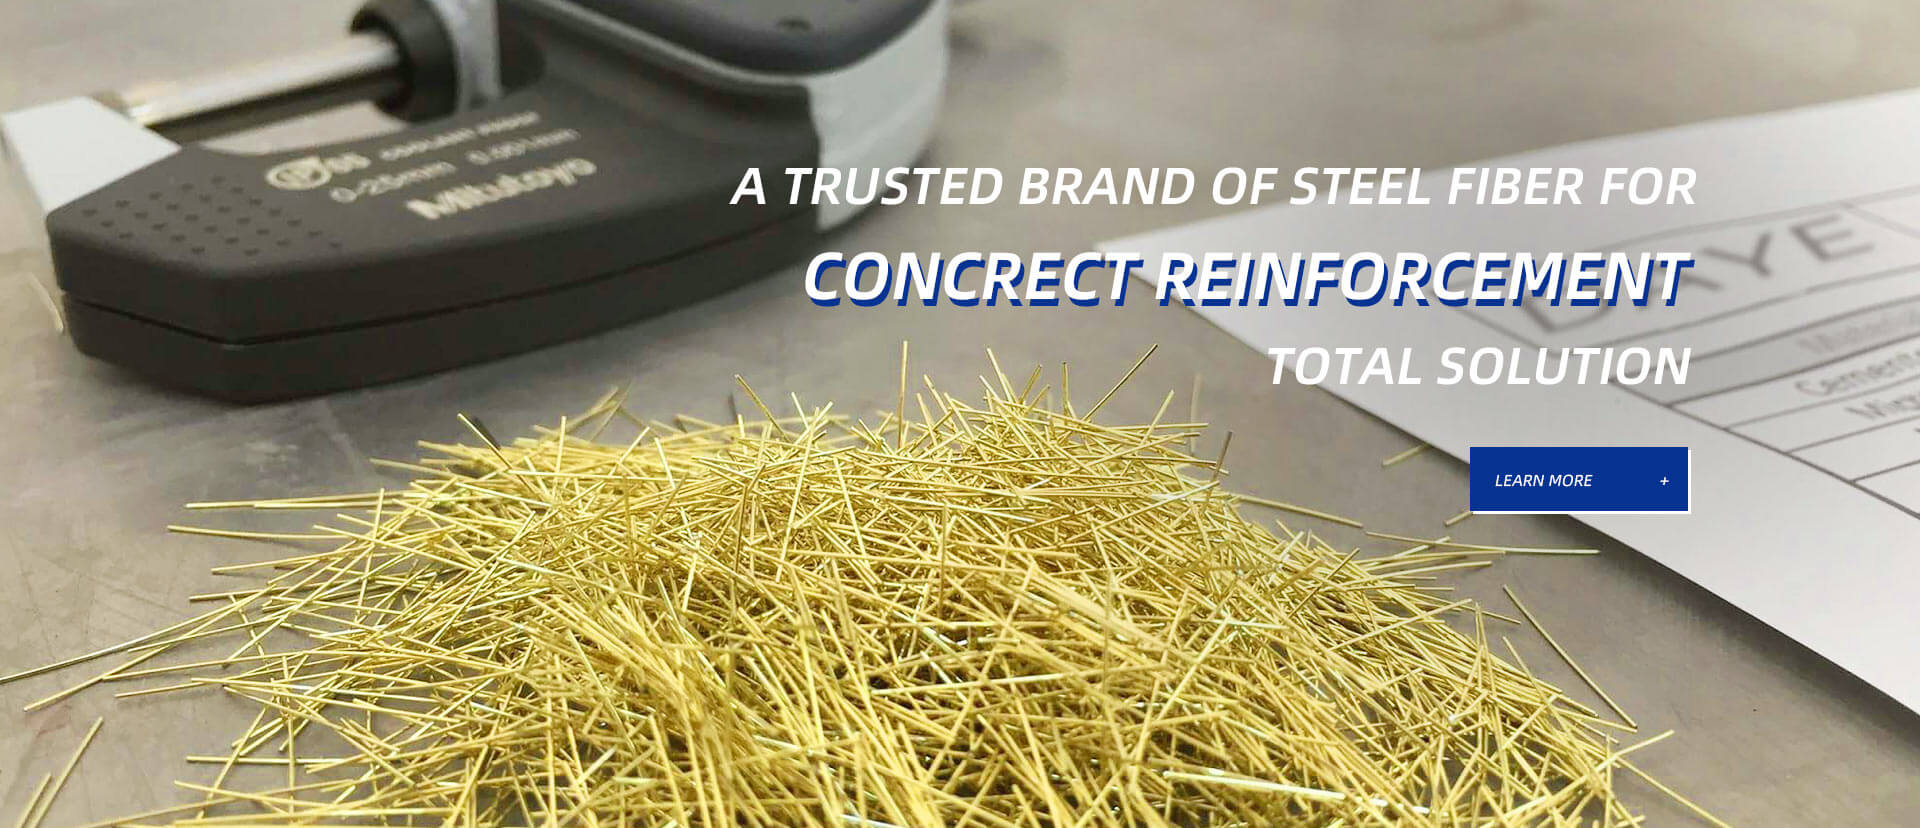 A TRUSTED BRAND OF STEEL FIBER FOR  CONCRECT REINFORCEMENT  TOT